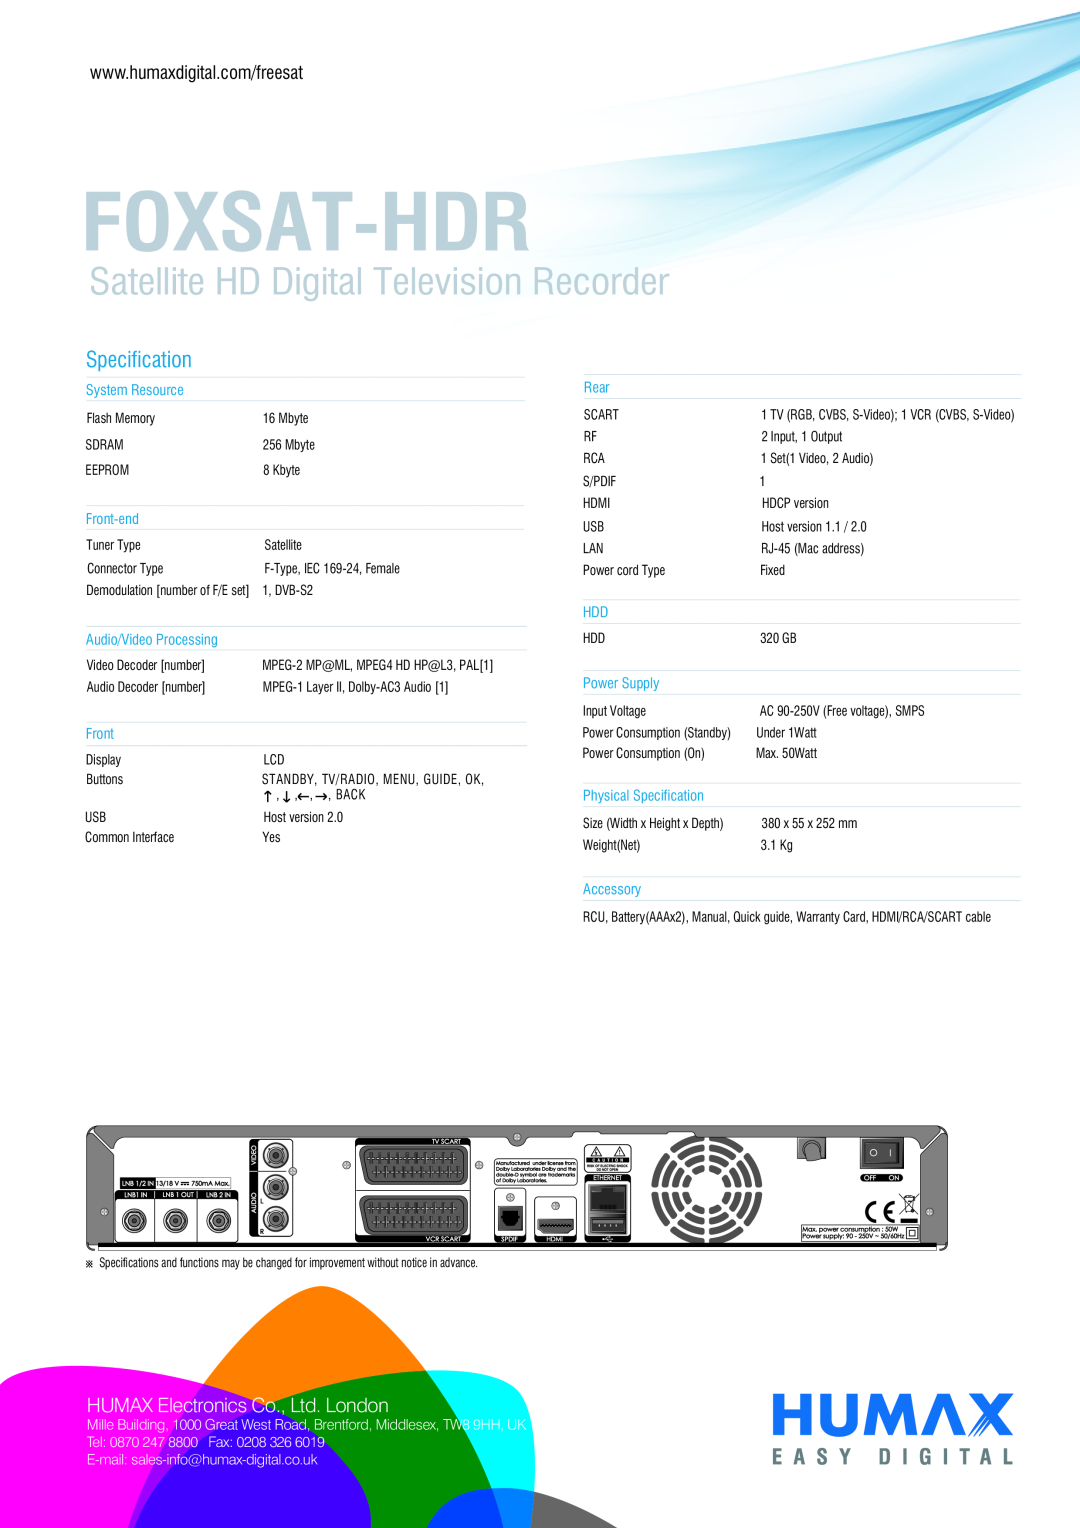 Humax FOXSAT-HDR Foxsat-Hdr, Satellite HD Digital Television Recorder, Specification, System Resource, Front-end, Rear 